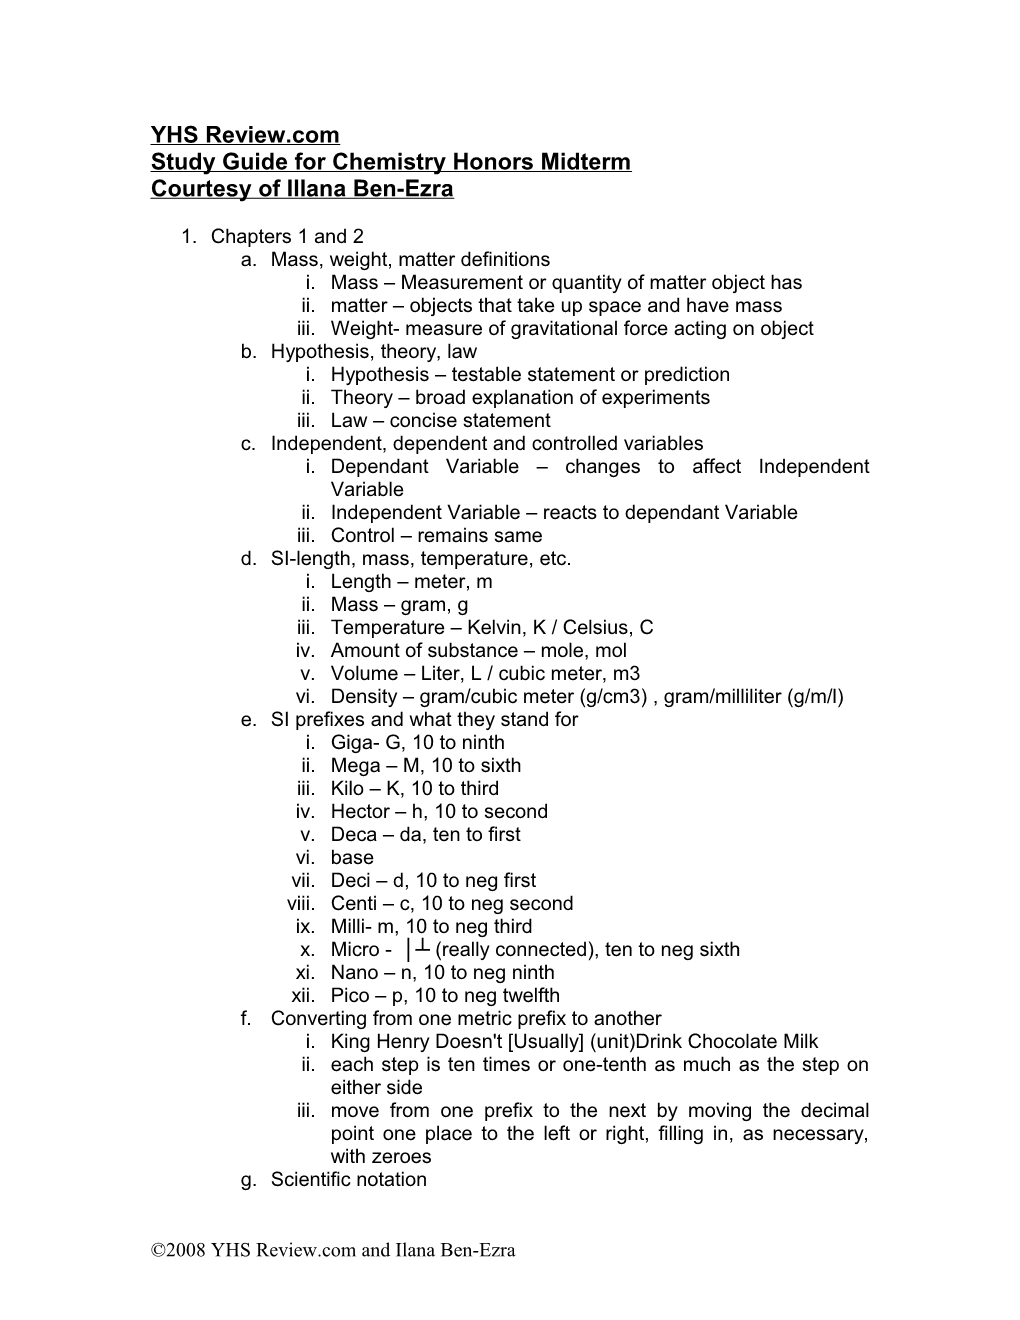 Study Guide for Chemistry Honors Midterm